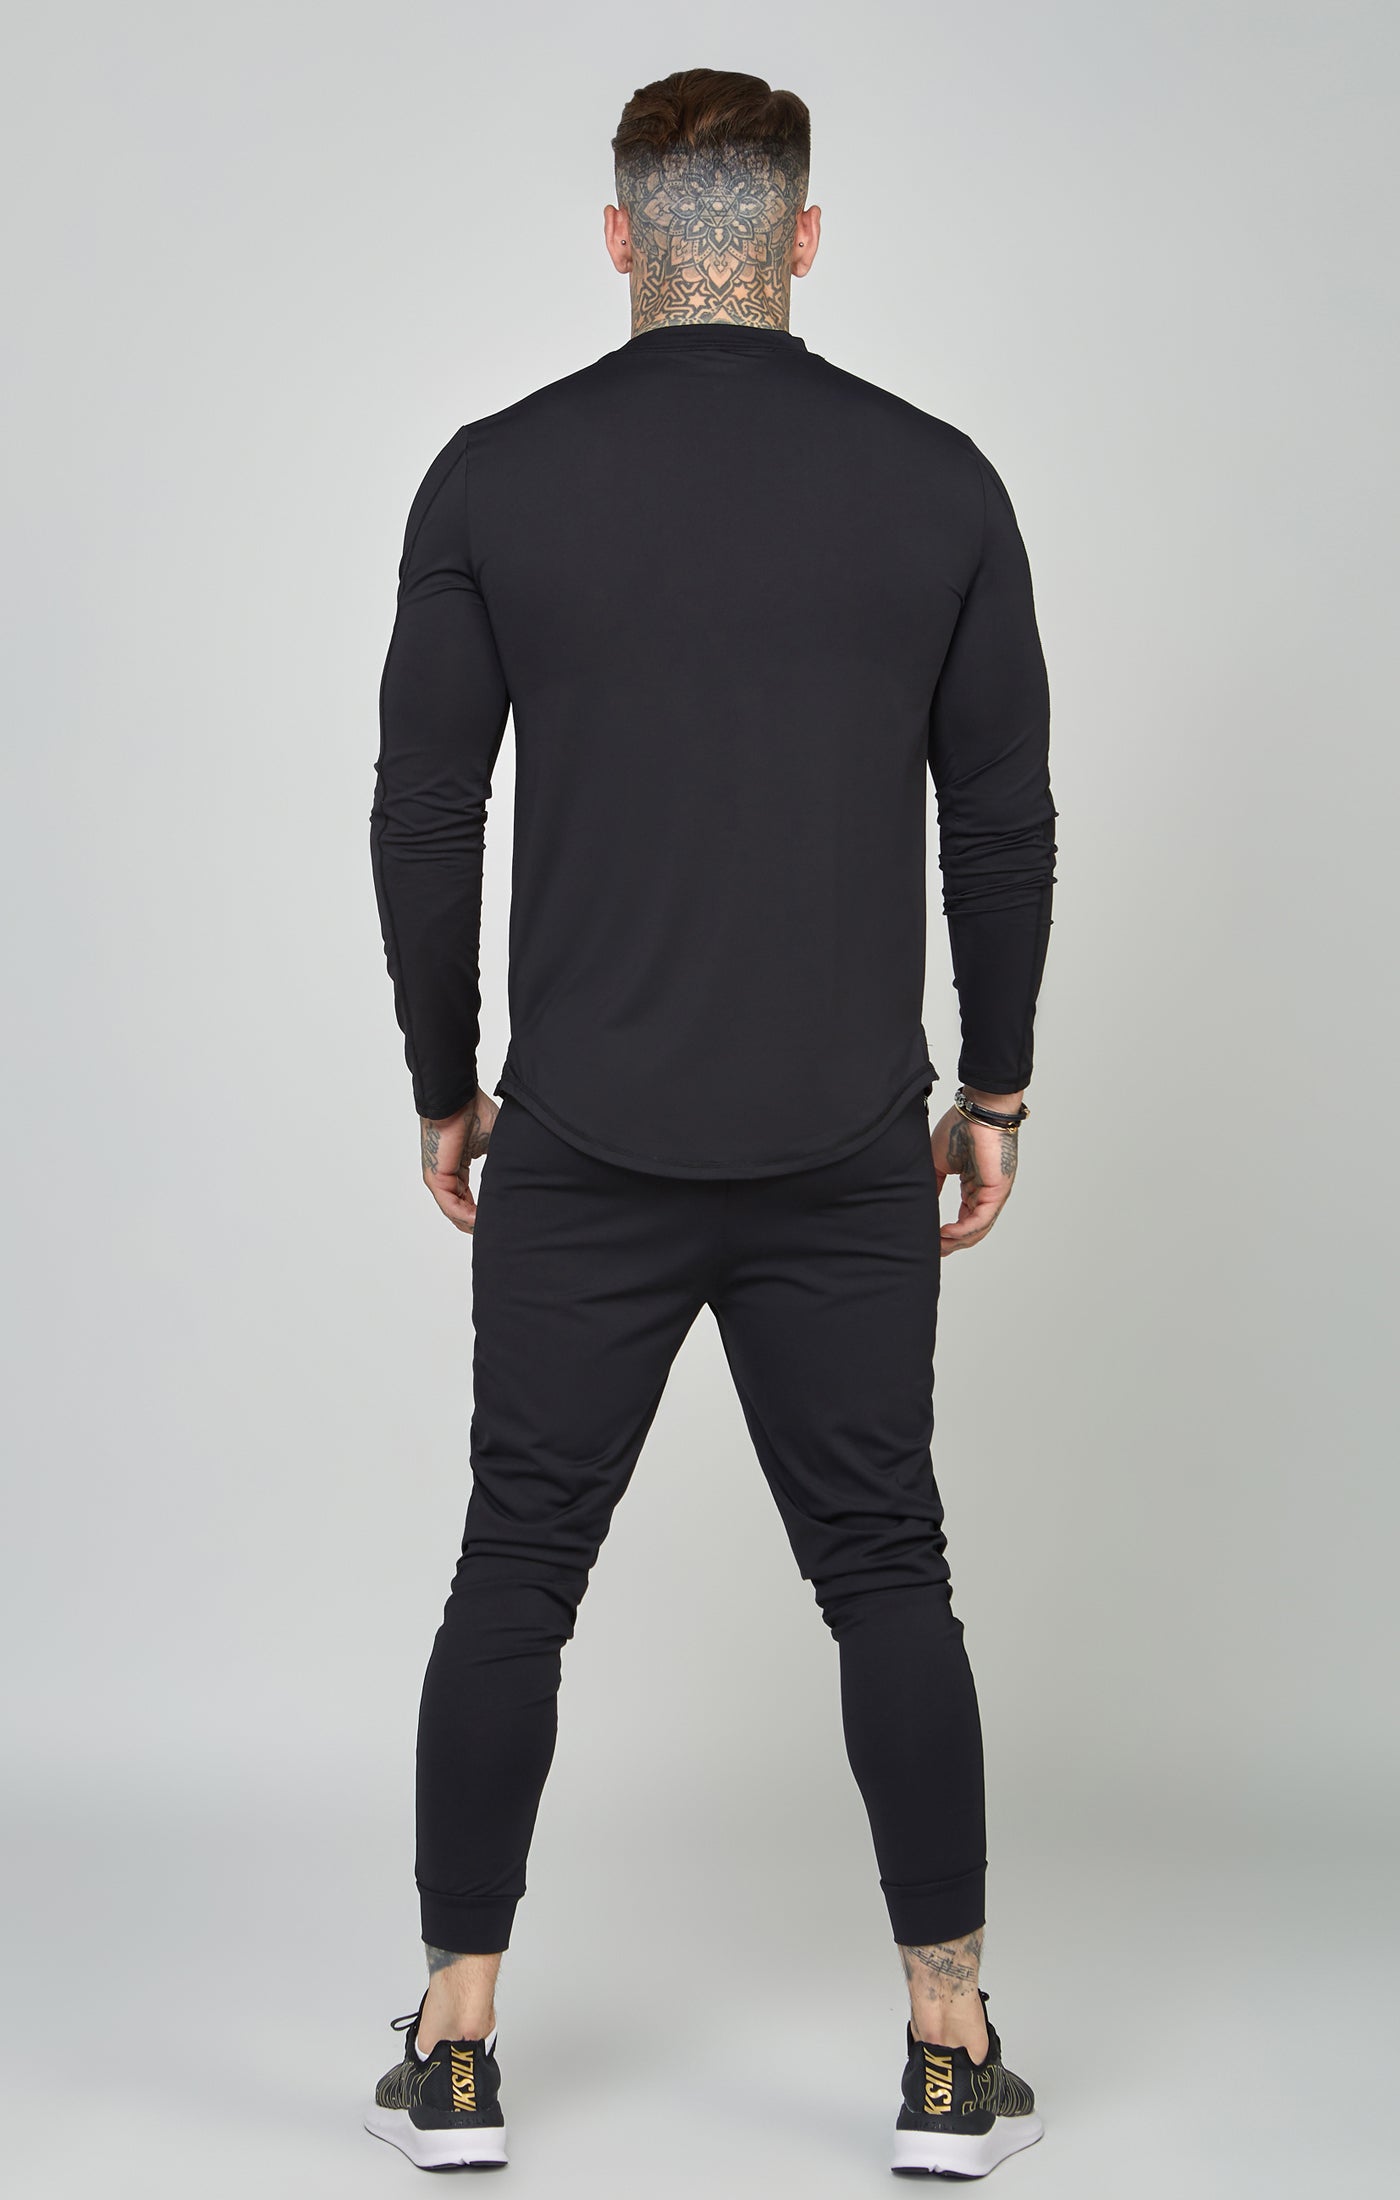 Black Sports Muscle Fit Long Sleeve Top (4)